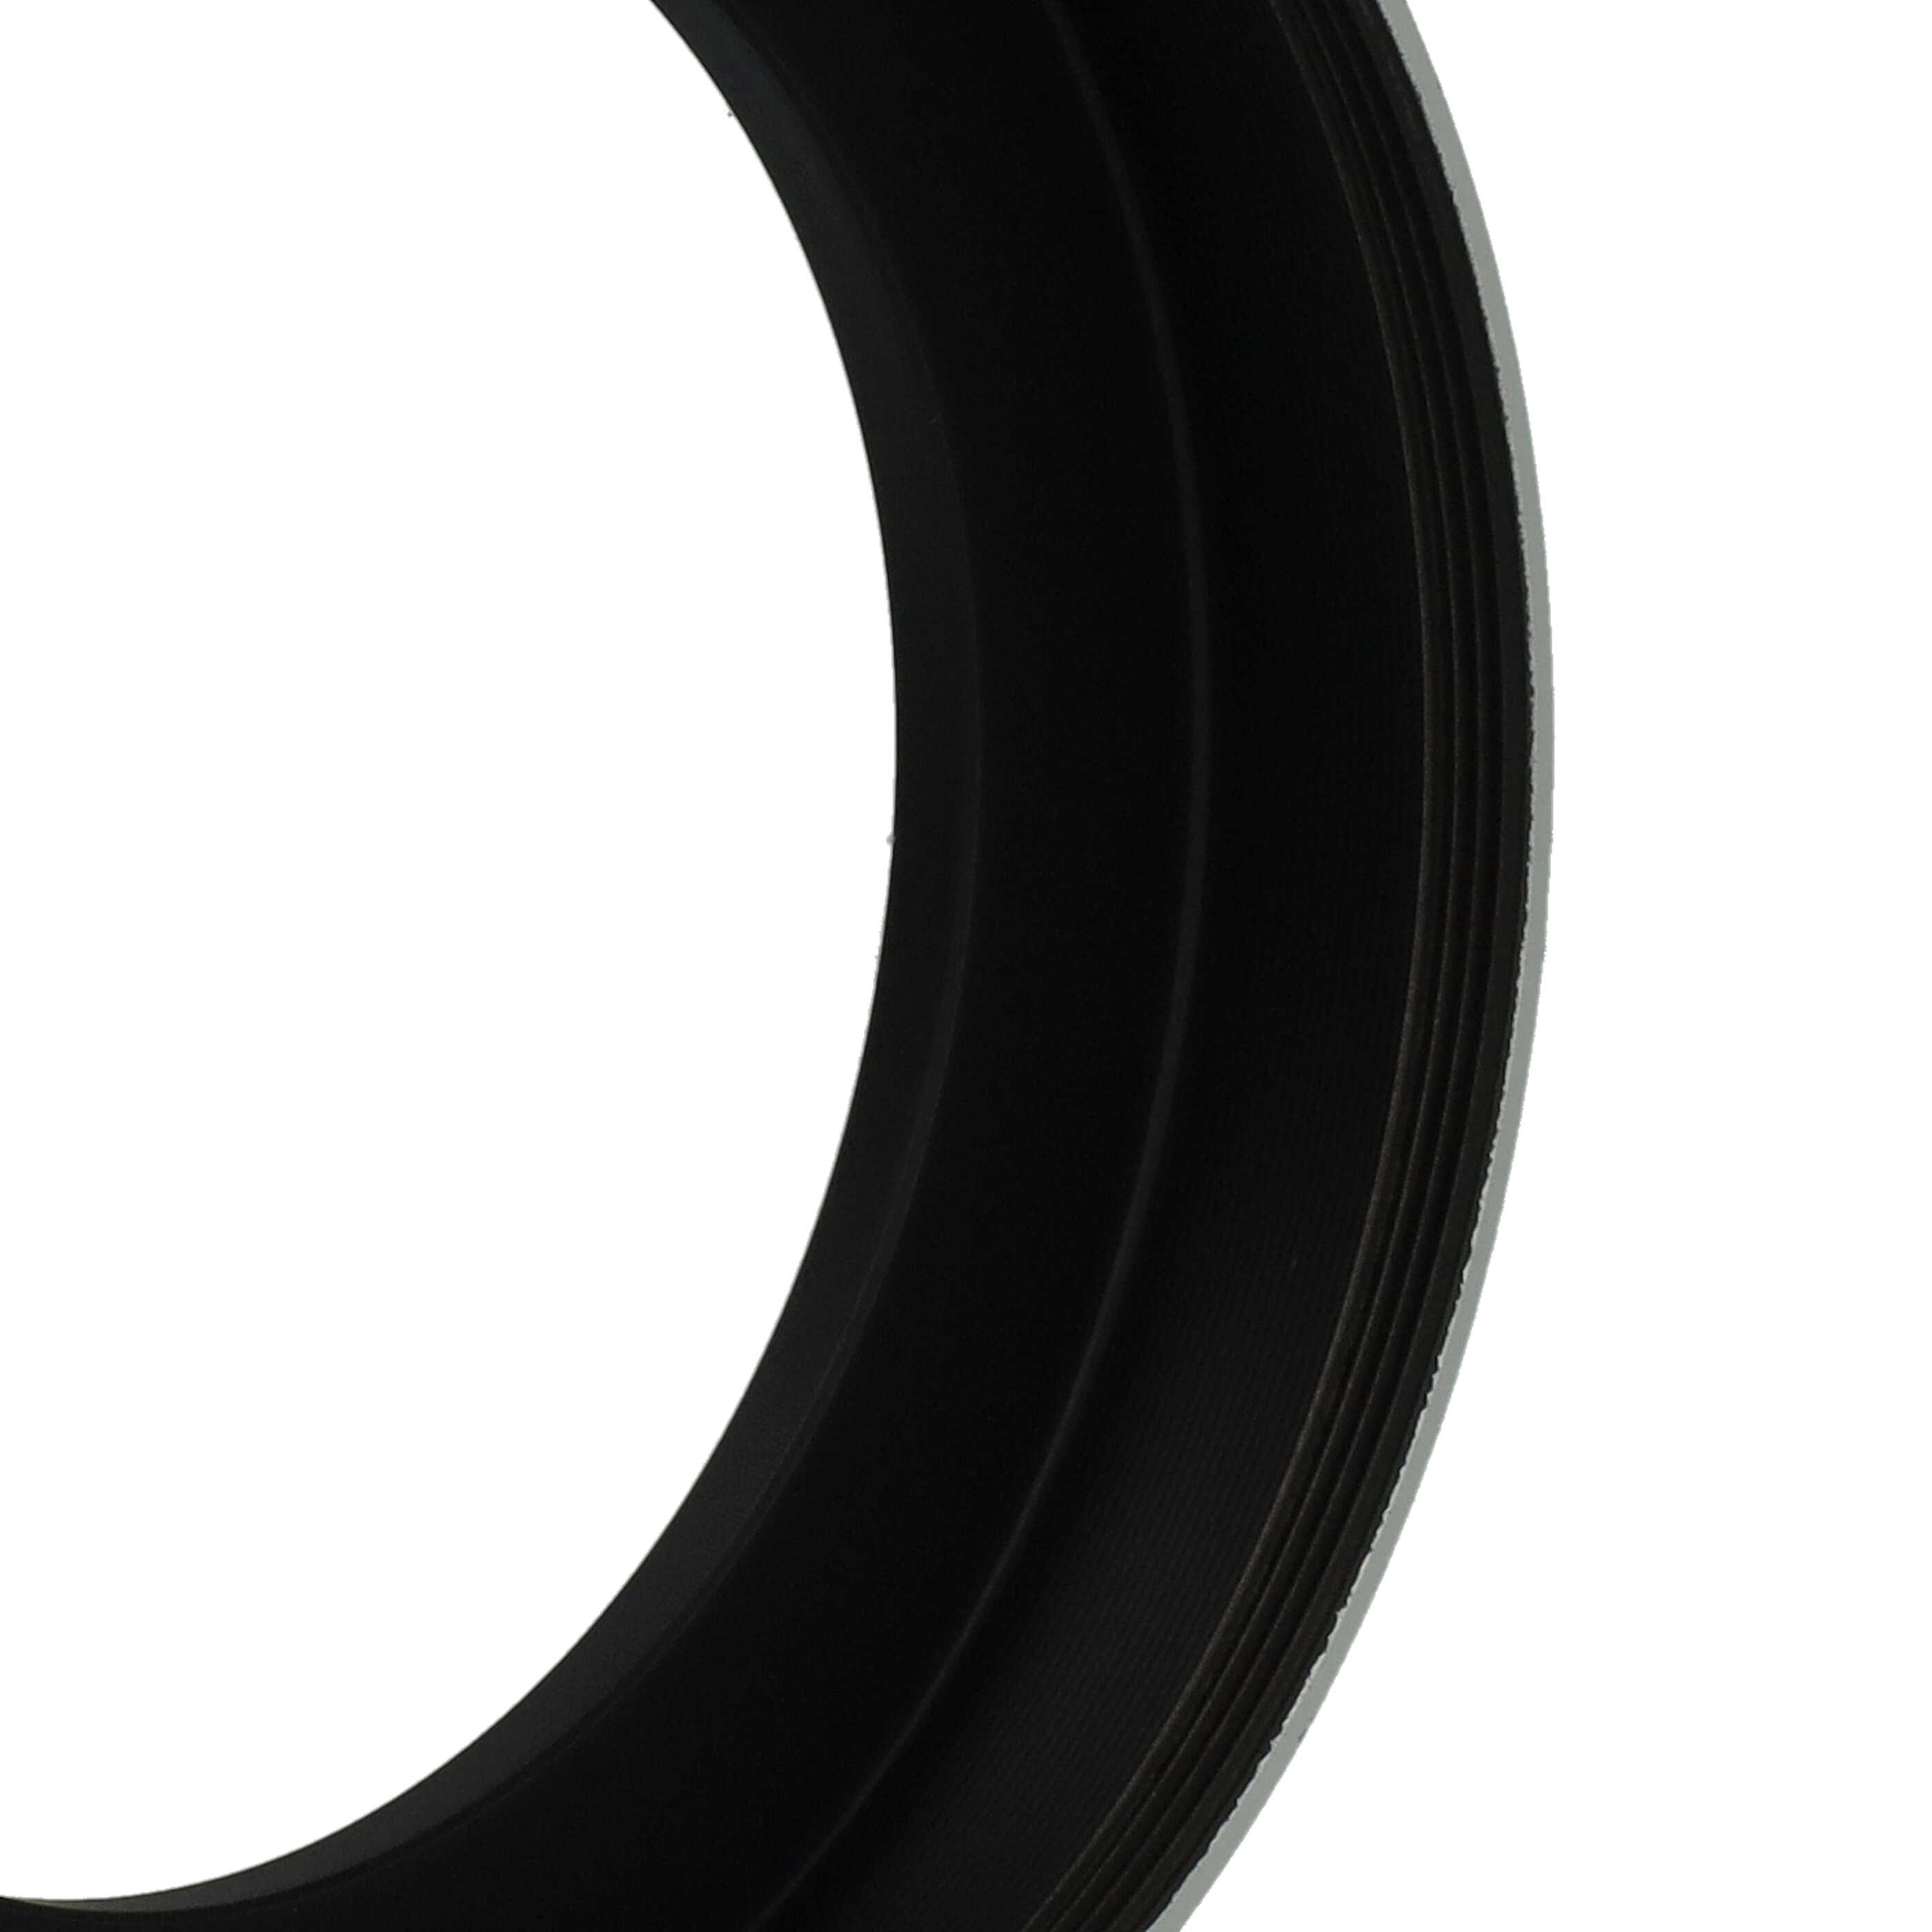 Lens Hood suitable for Hasselblad Camera 